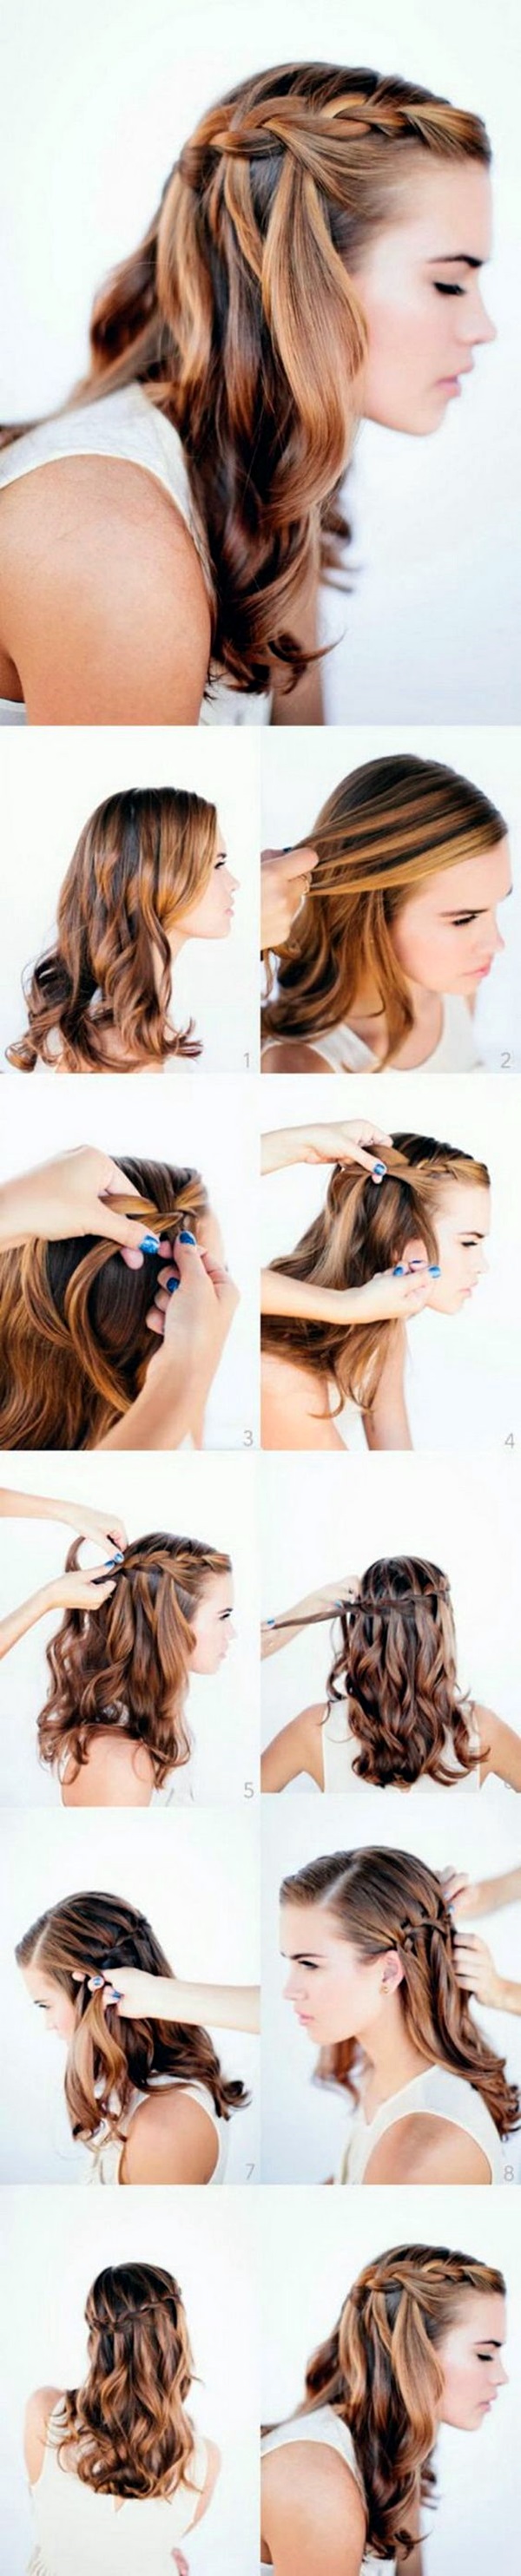 easy-back-to-school-hairstyles-24